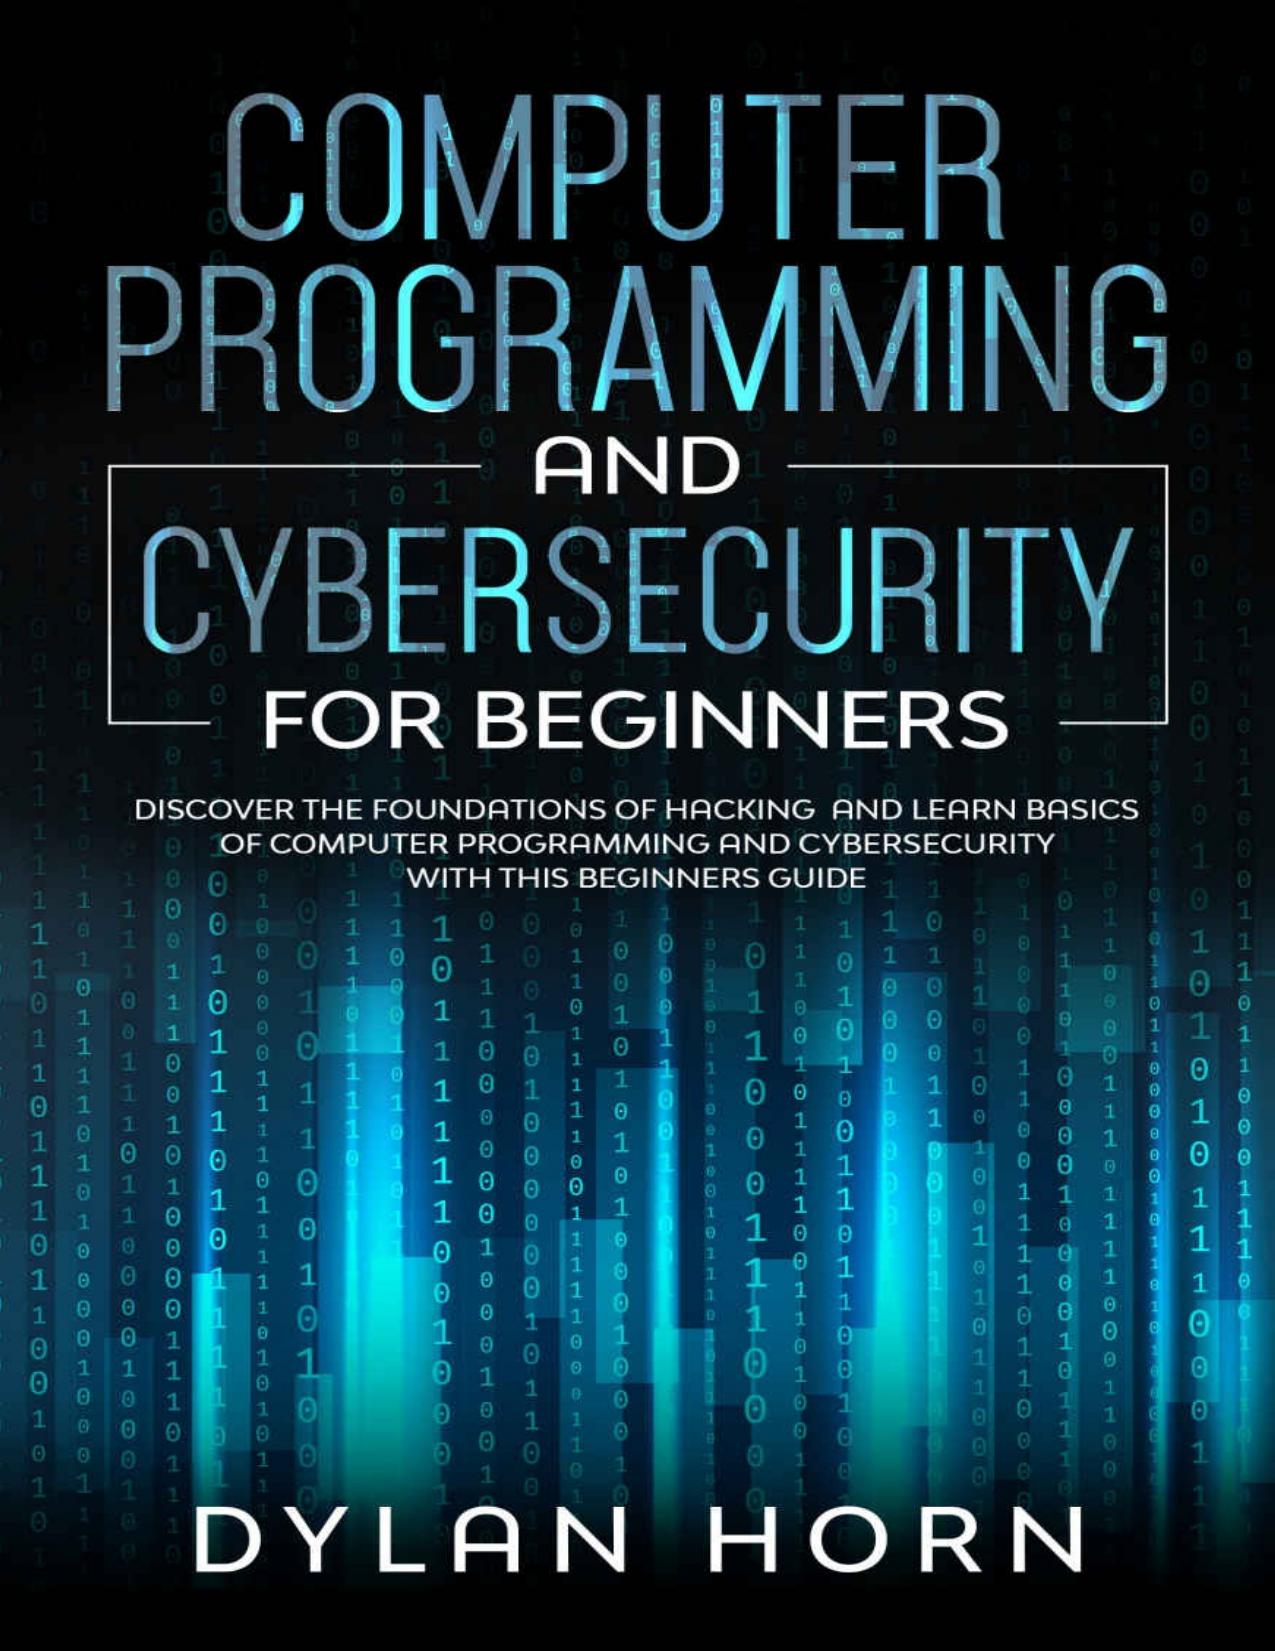 Computer Programming and Cybersecurity For Beginners: Discover the Foundations of Hacking and Learn Basics of Computer Programming and Cybersecurity with this Beginners Guide by Dylan Horn